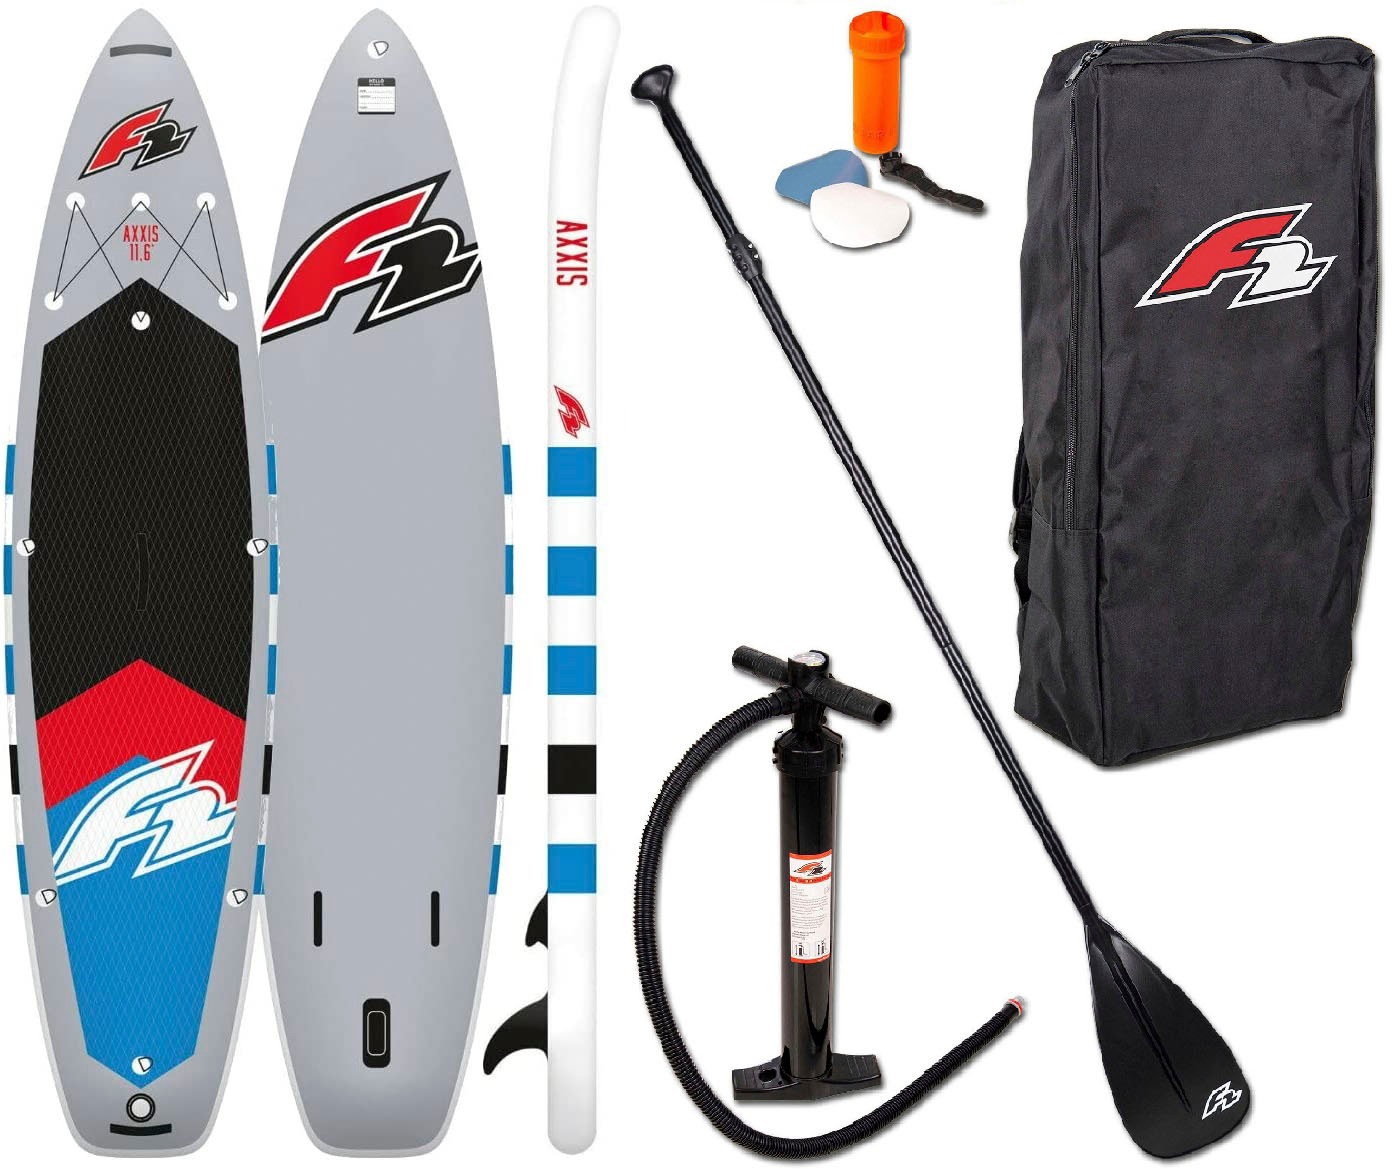 F2 Inflatable SUP-Board »Axxis 11,6 grey«, (Packung, 5 tlg.) kaufen bei OTTO | SUP-Boards